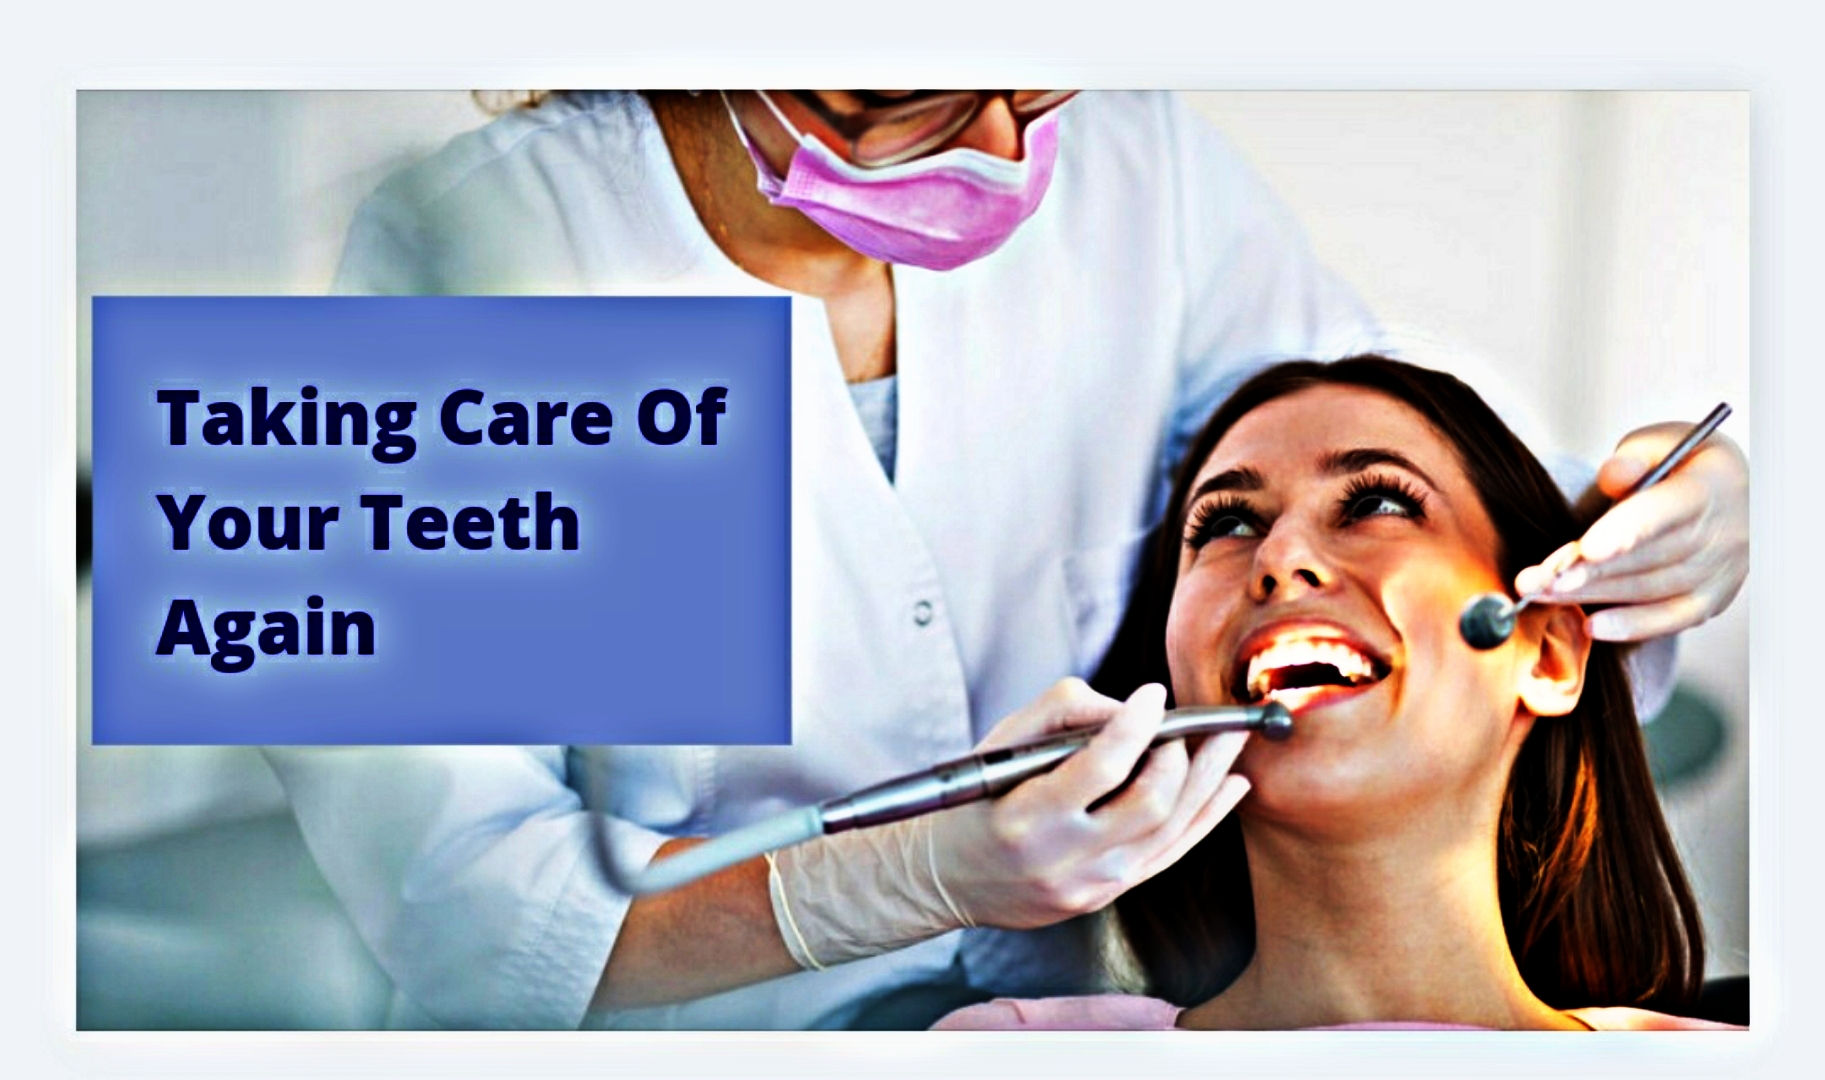 Taking Care of your teeth again